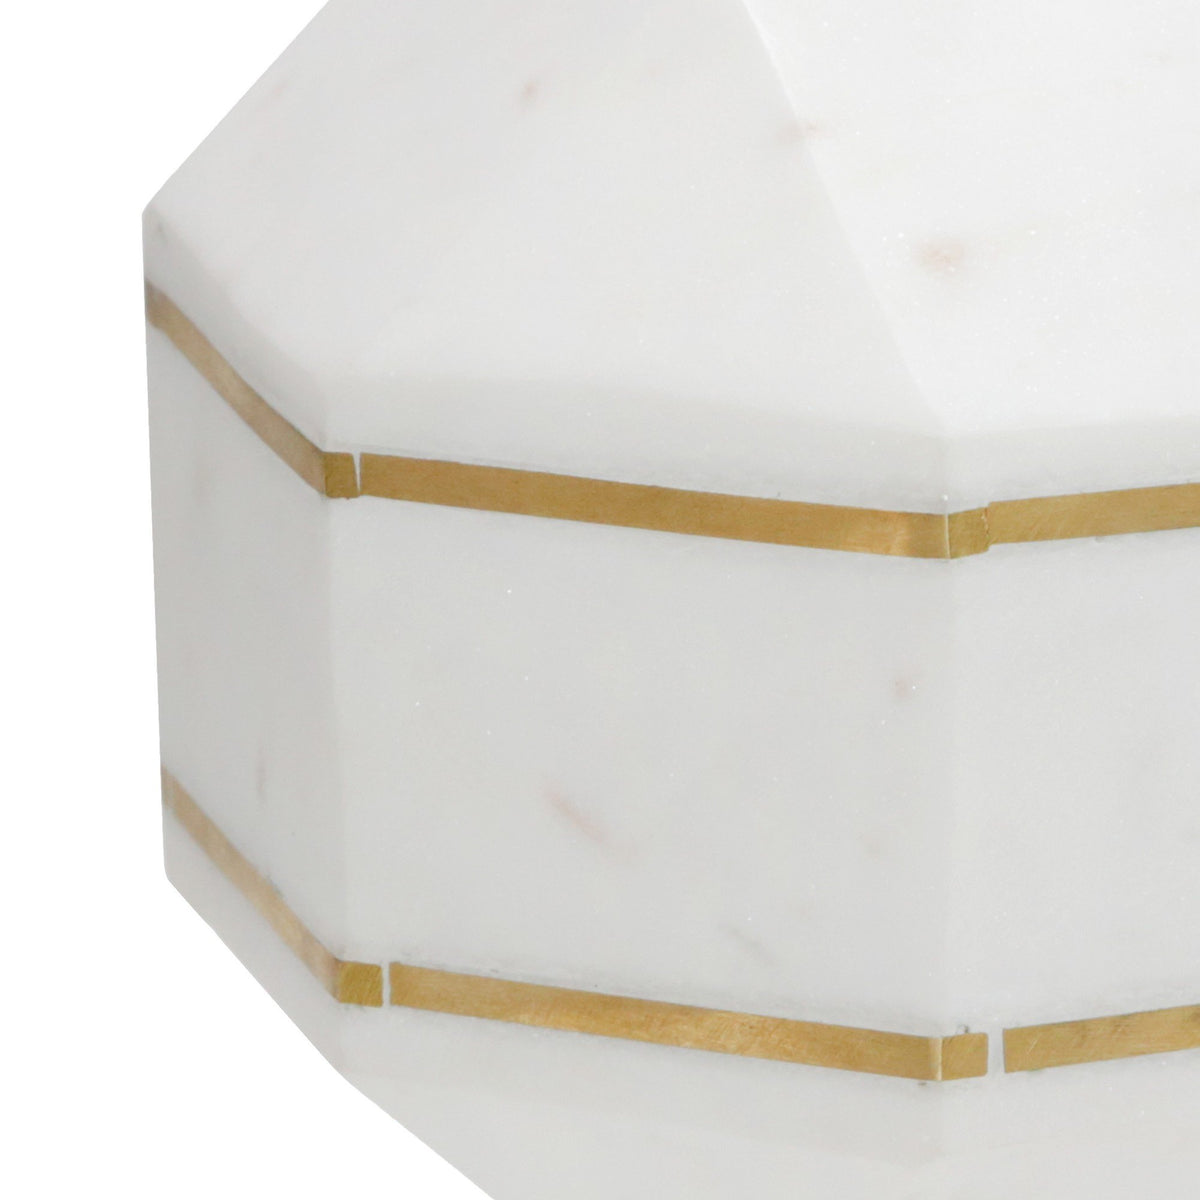 6 Inches Marble Frame Octagonal Orb with Stable Base, White - BM221017